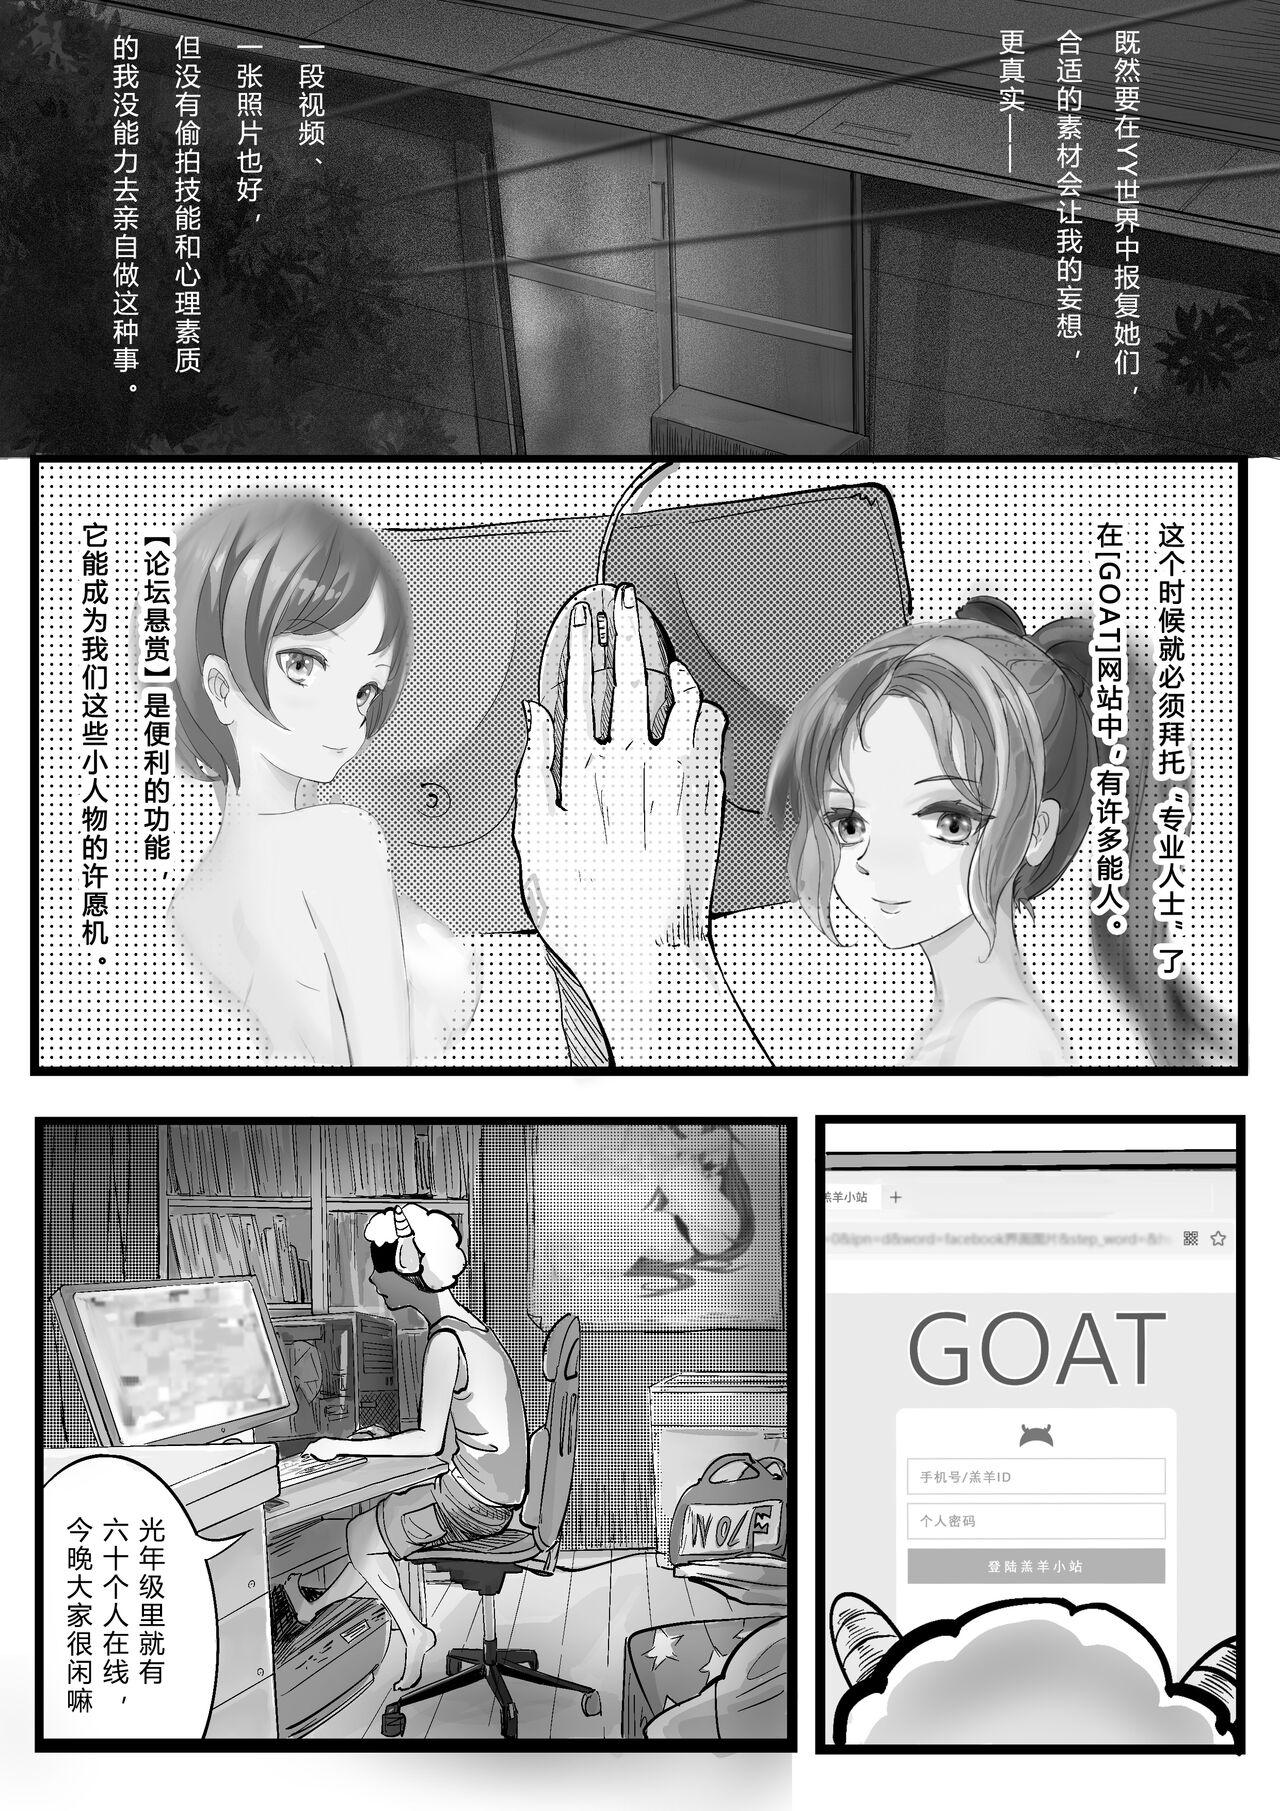 Mofos GOAT-goat chapter 2 - Original Fuck Pussy - Page 4